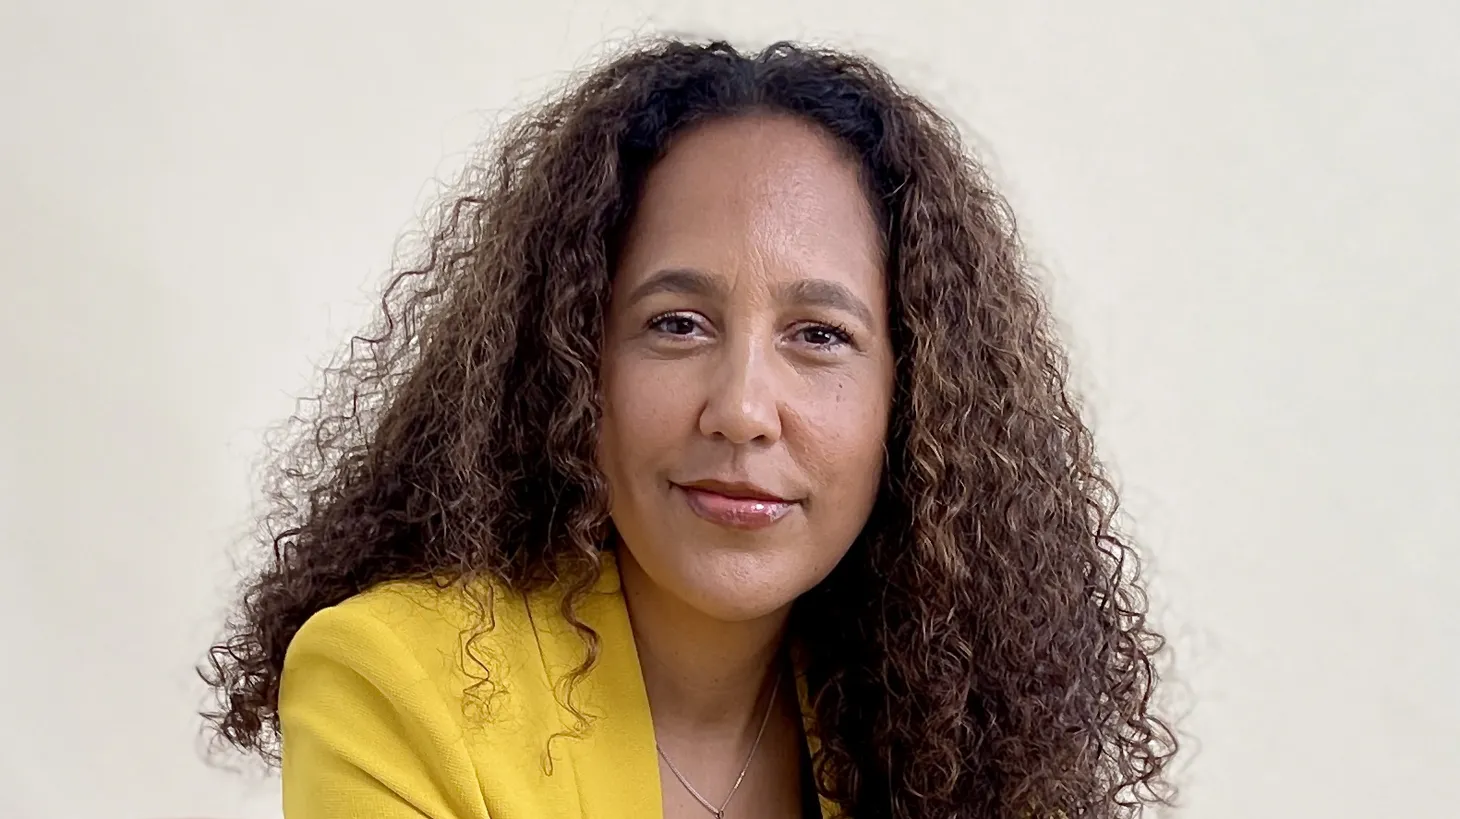 “I remember the first time I heard [‘Ex-Factor’]. It's a song that literally goes into your soul, and just fills you with this guttural pain,” says filmmaker Gina Prince-Bythewood.